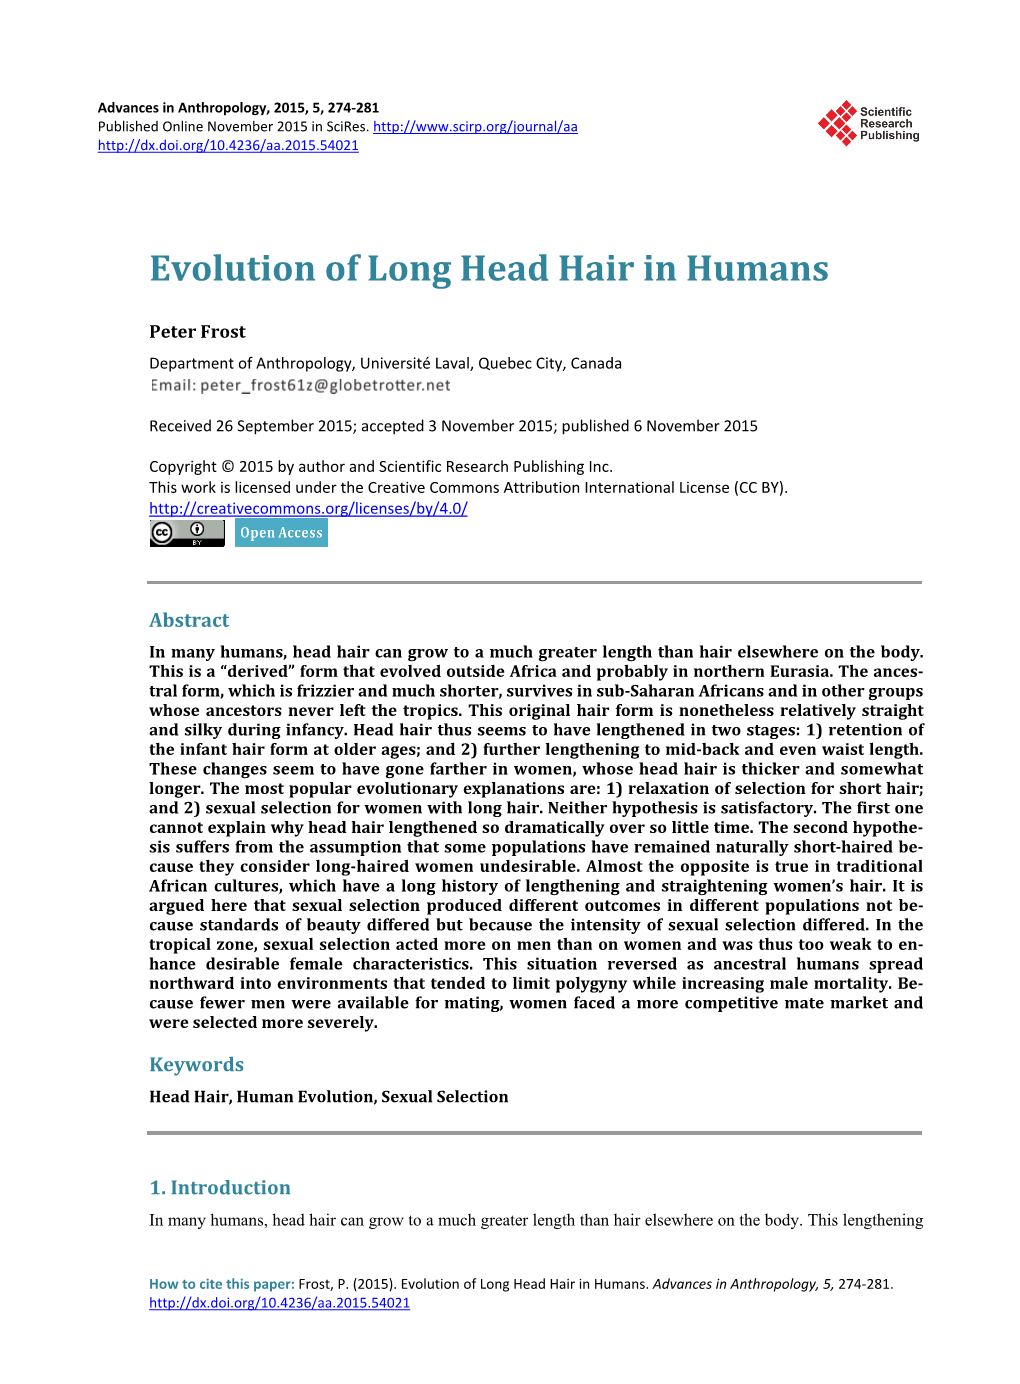 Evolution of Long Head Hair in Humans